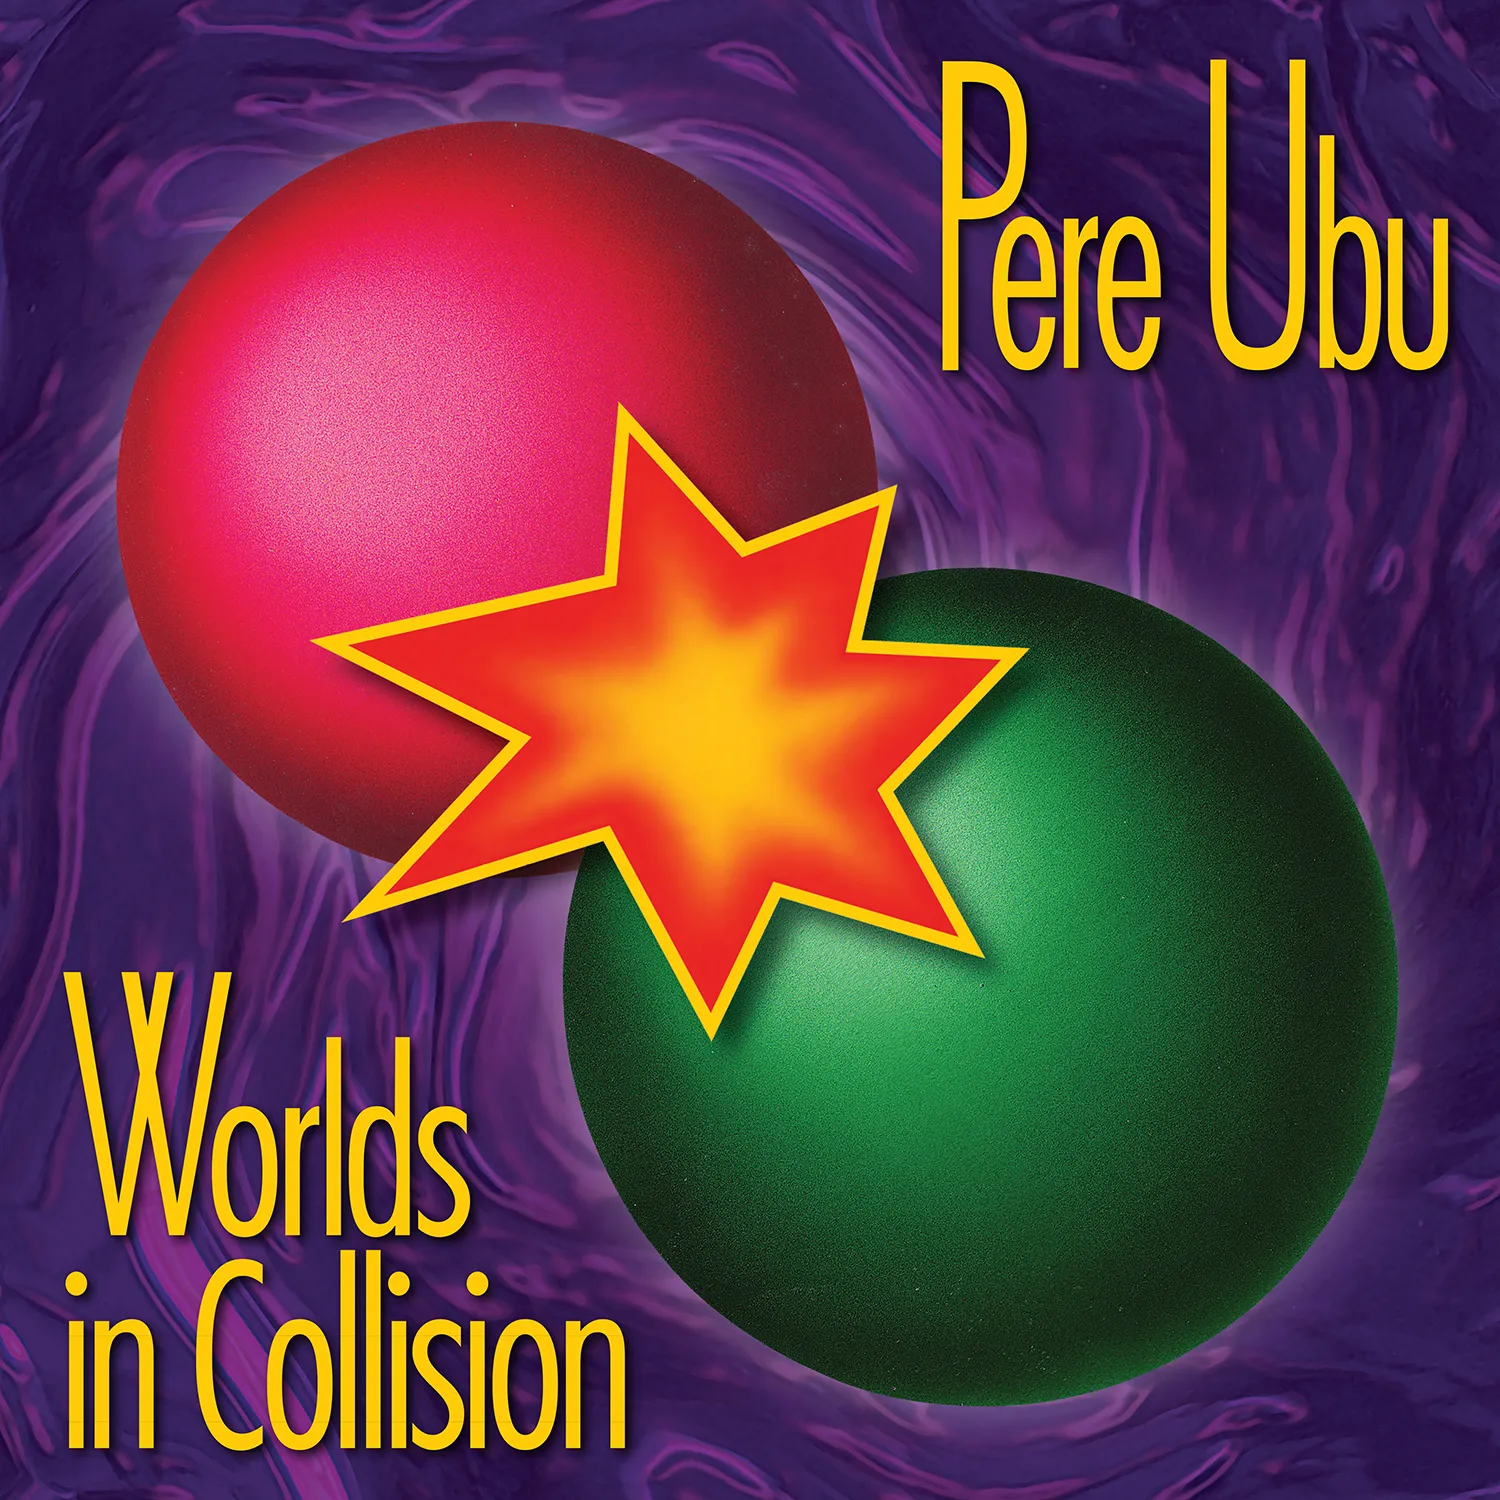 <strong>Pere Ubu - Worlds in Collision</strong> (Vinyl LP - black)